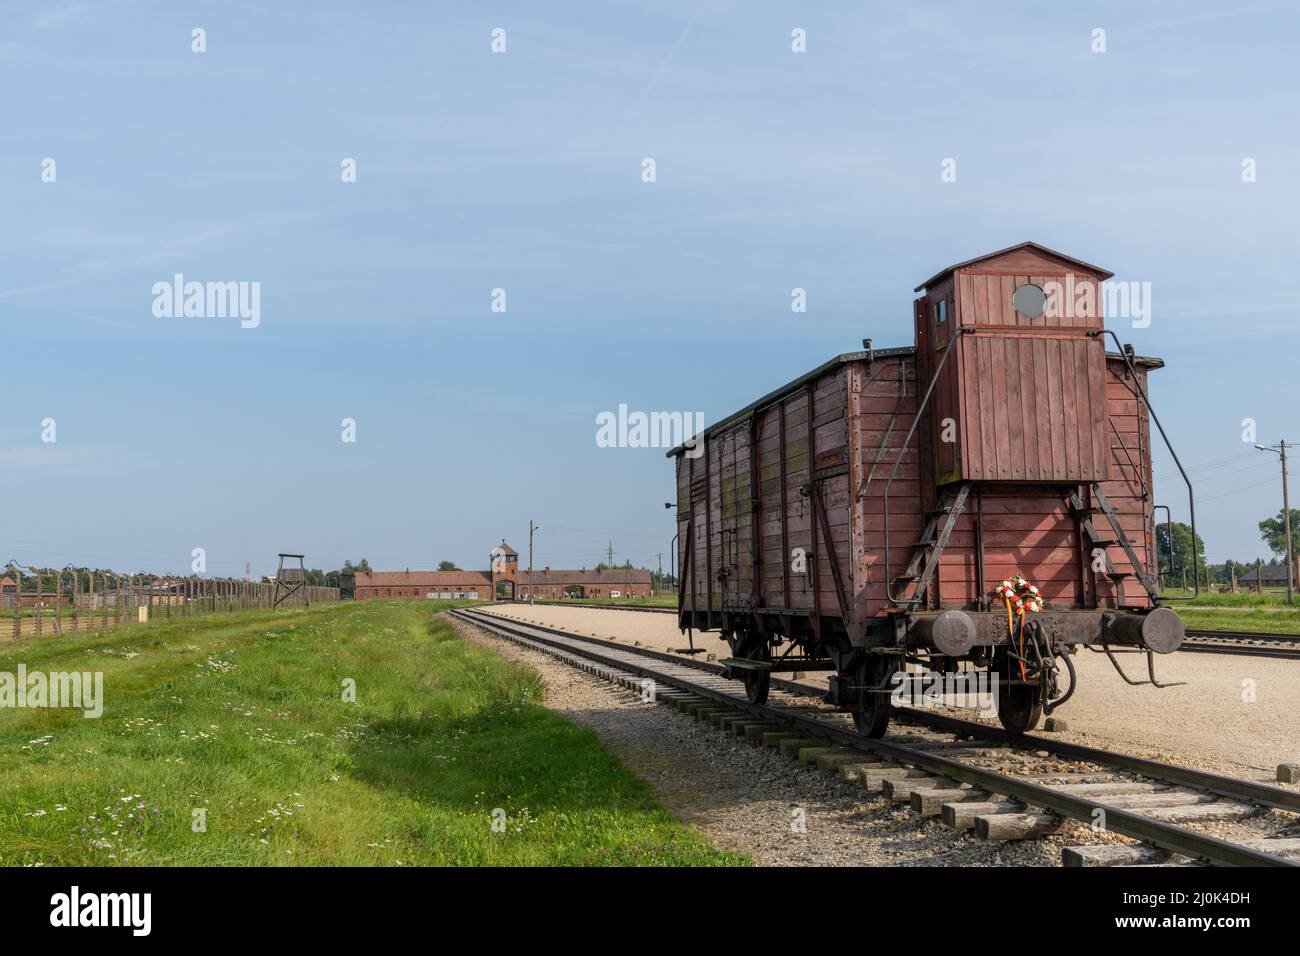 Auschwitz Concentration Camp in Poland with railroad tracks and a wooden carriage for transporting prisoners in the foreground Stock Photo